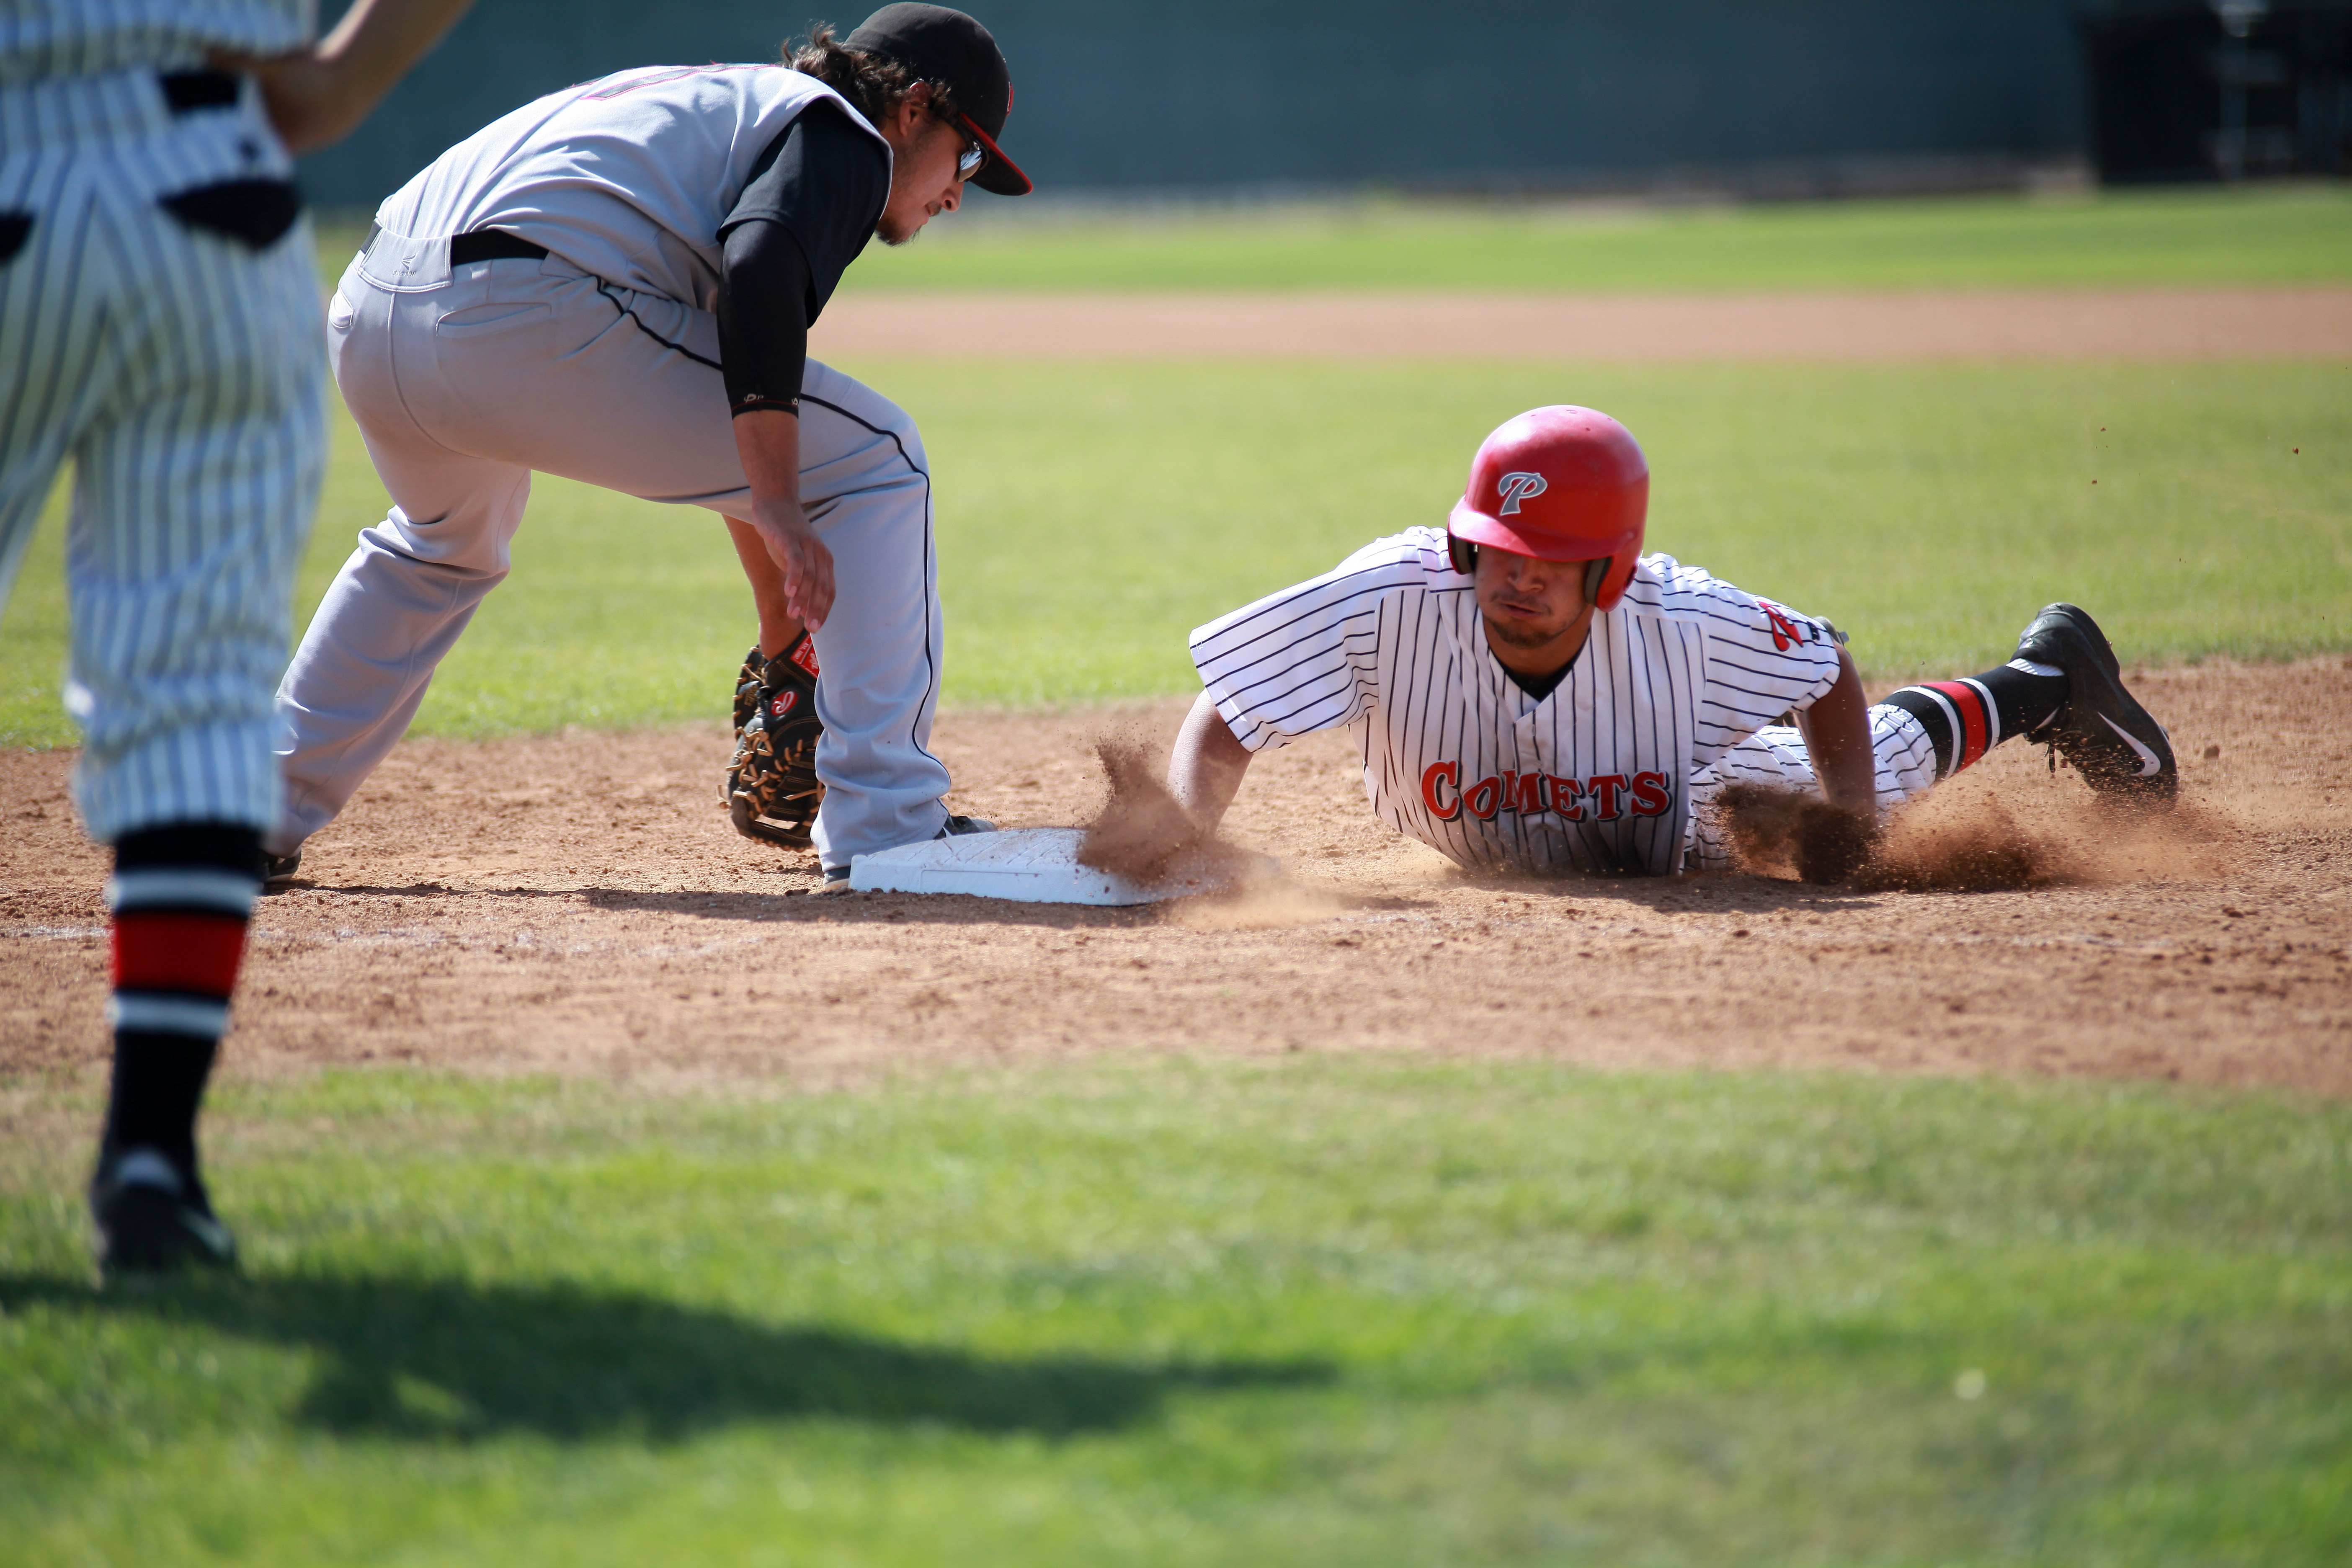 A Palomar baseball player slides to a base on his stomach as an opposing player crouches above him with his mitted hand near the ground.